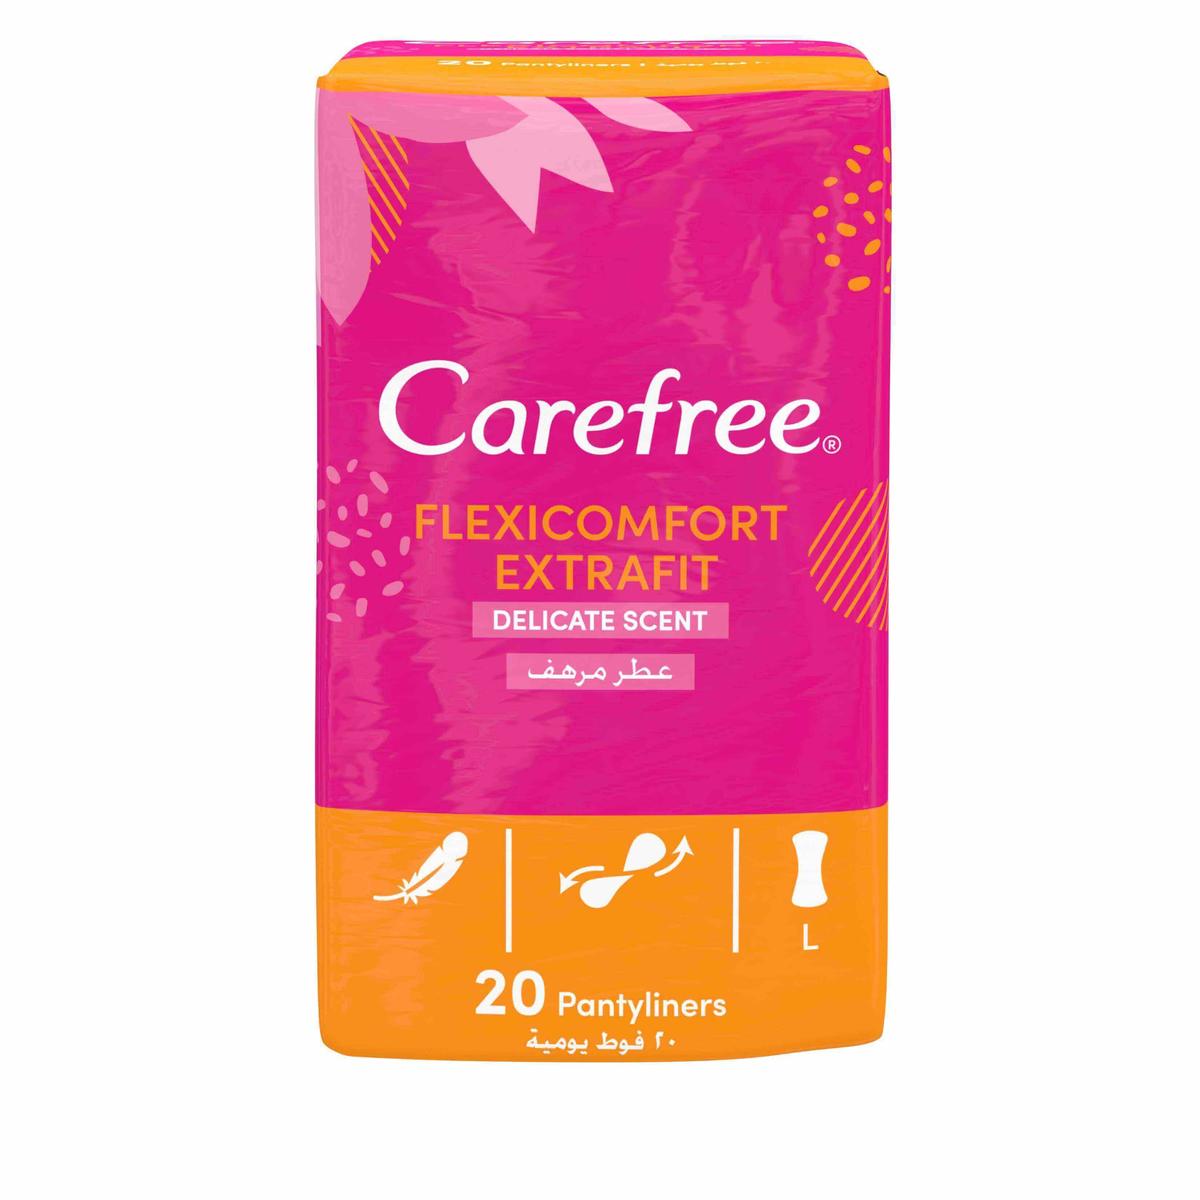 Carefree Flexicomfort Extra Fit with Delicate Scent 20-Pack